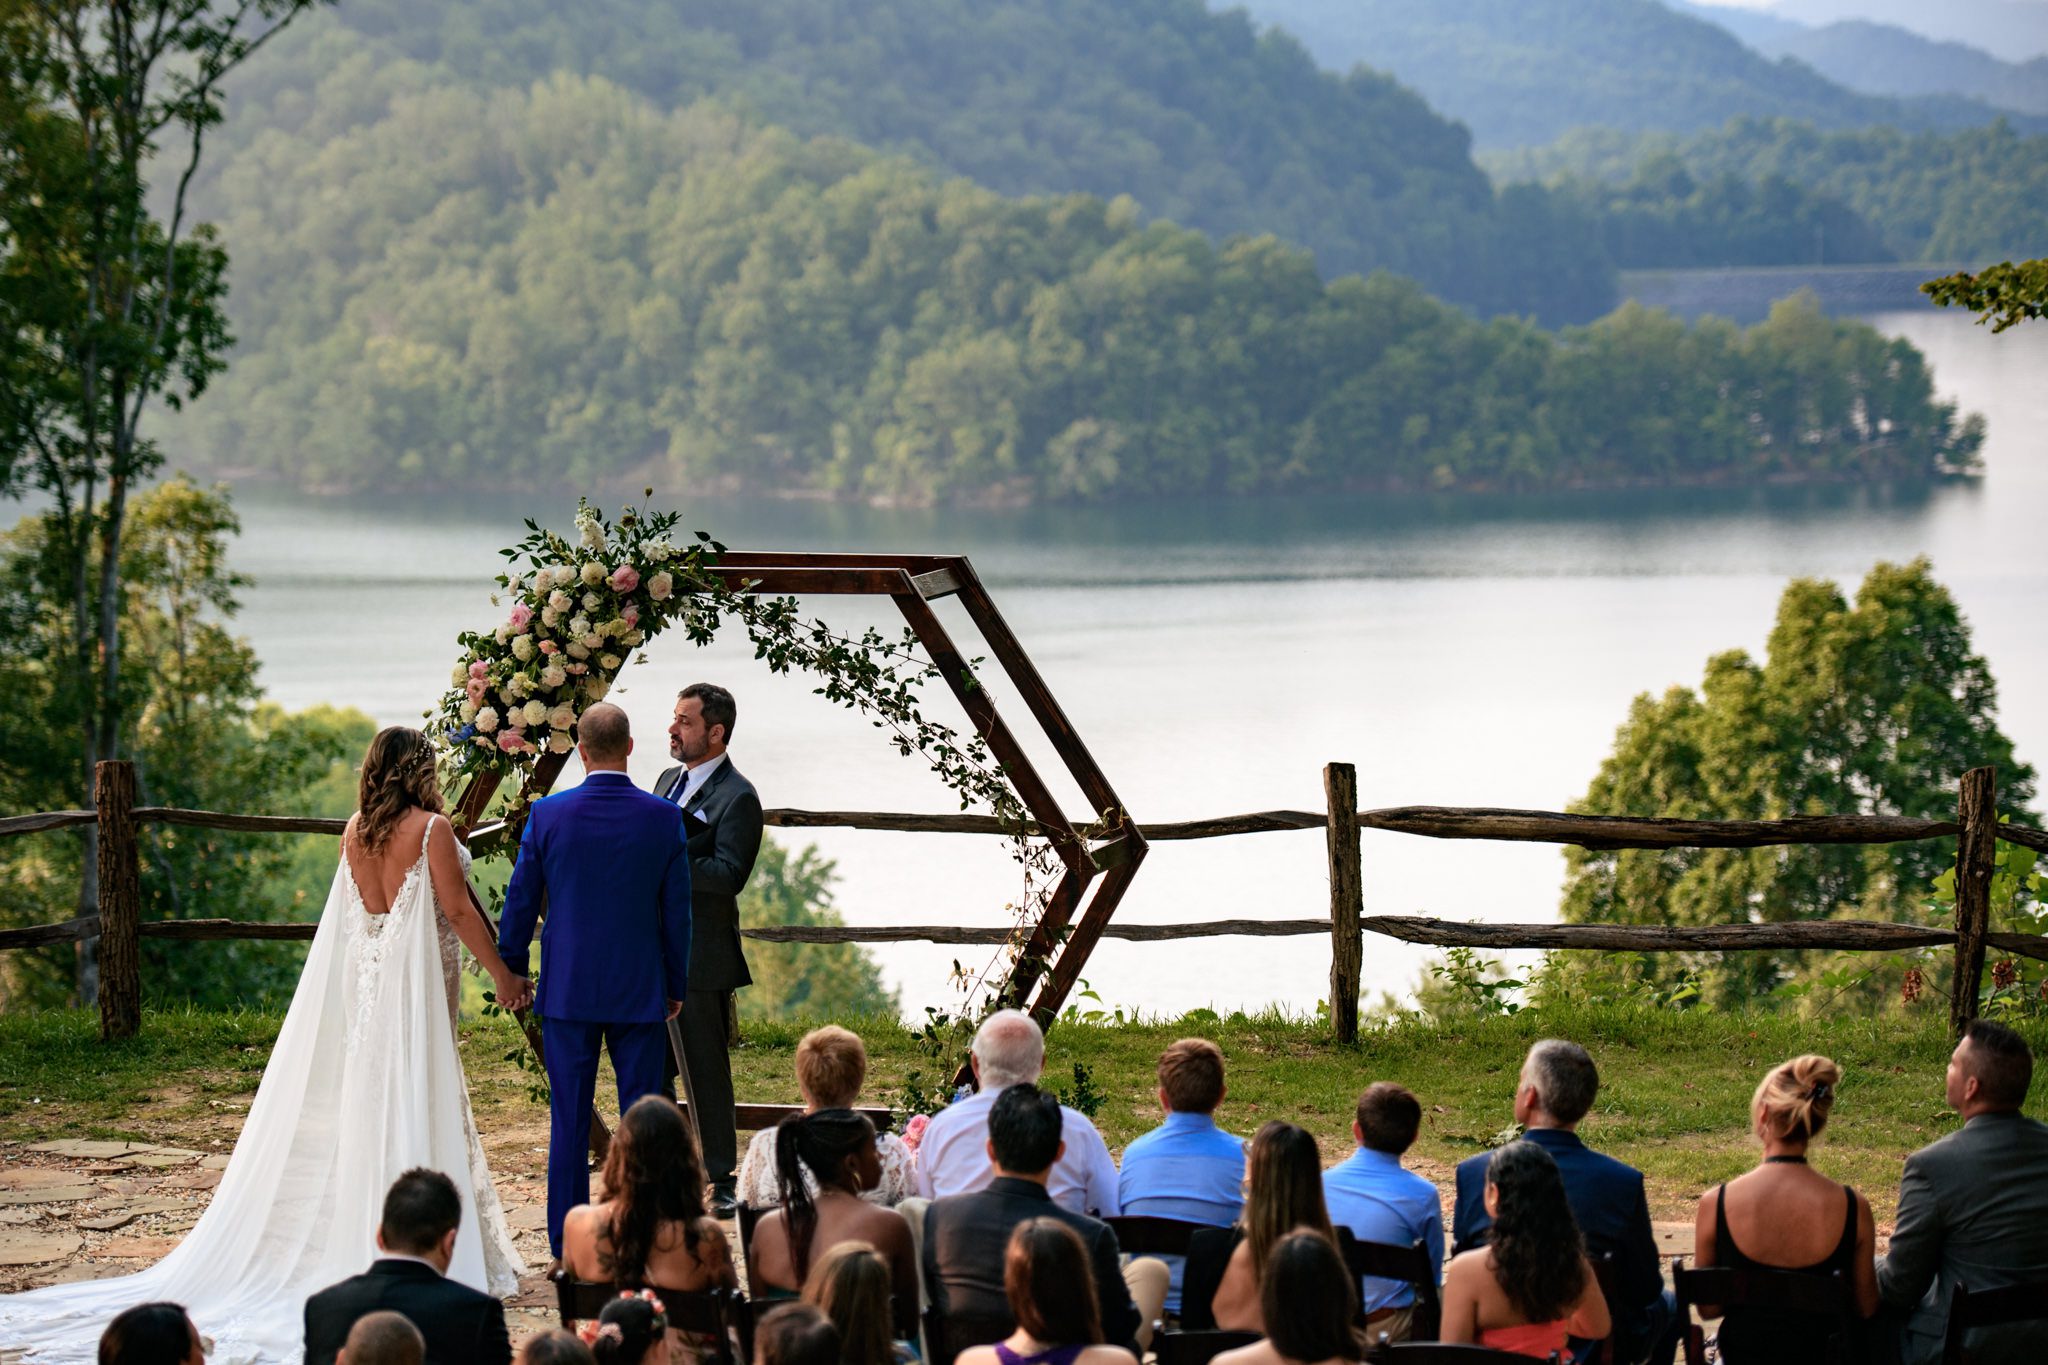 Bride and groom standing underneath arbor at Nantahala wedding shot while being a second photographer